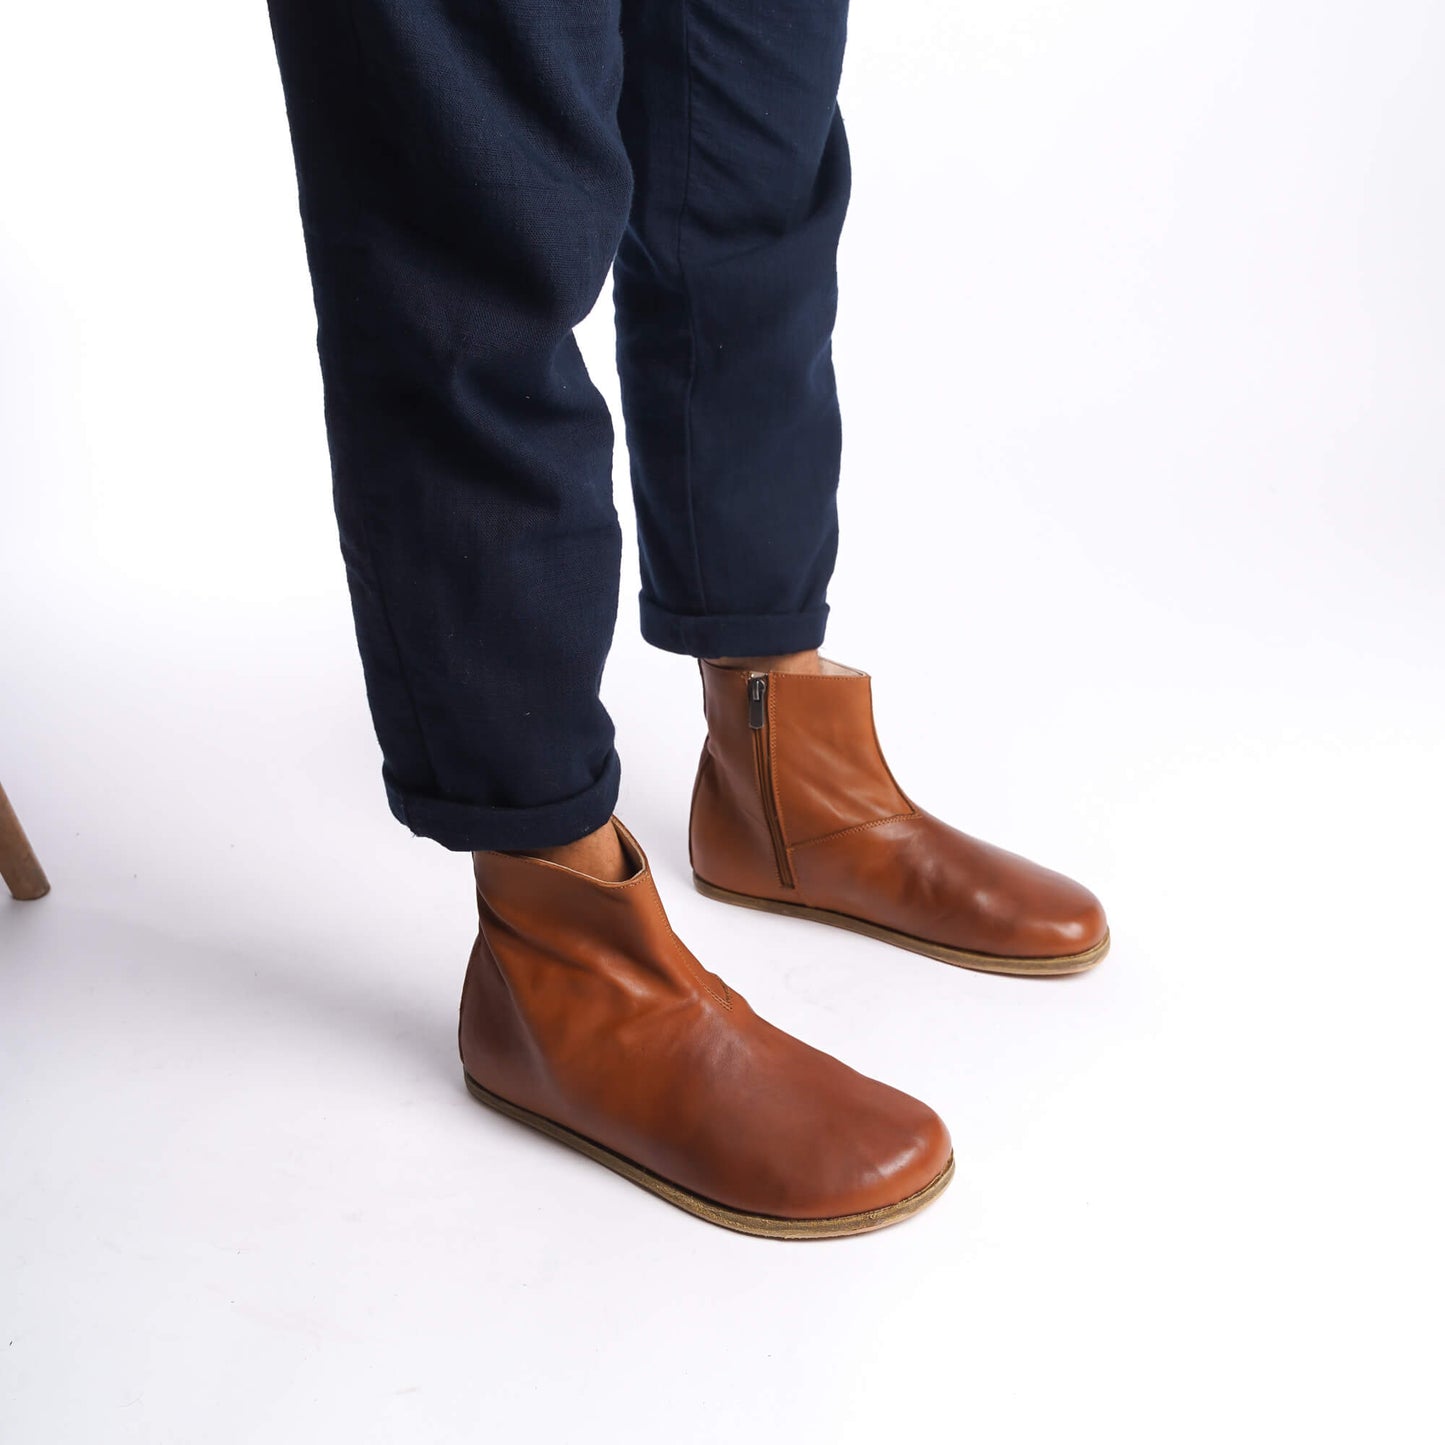 Tan brown leather barefoot ankle boots for men, perfect for winter, with a stylish zipper detail.